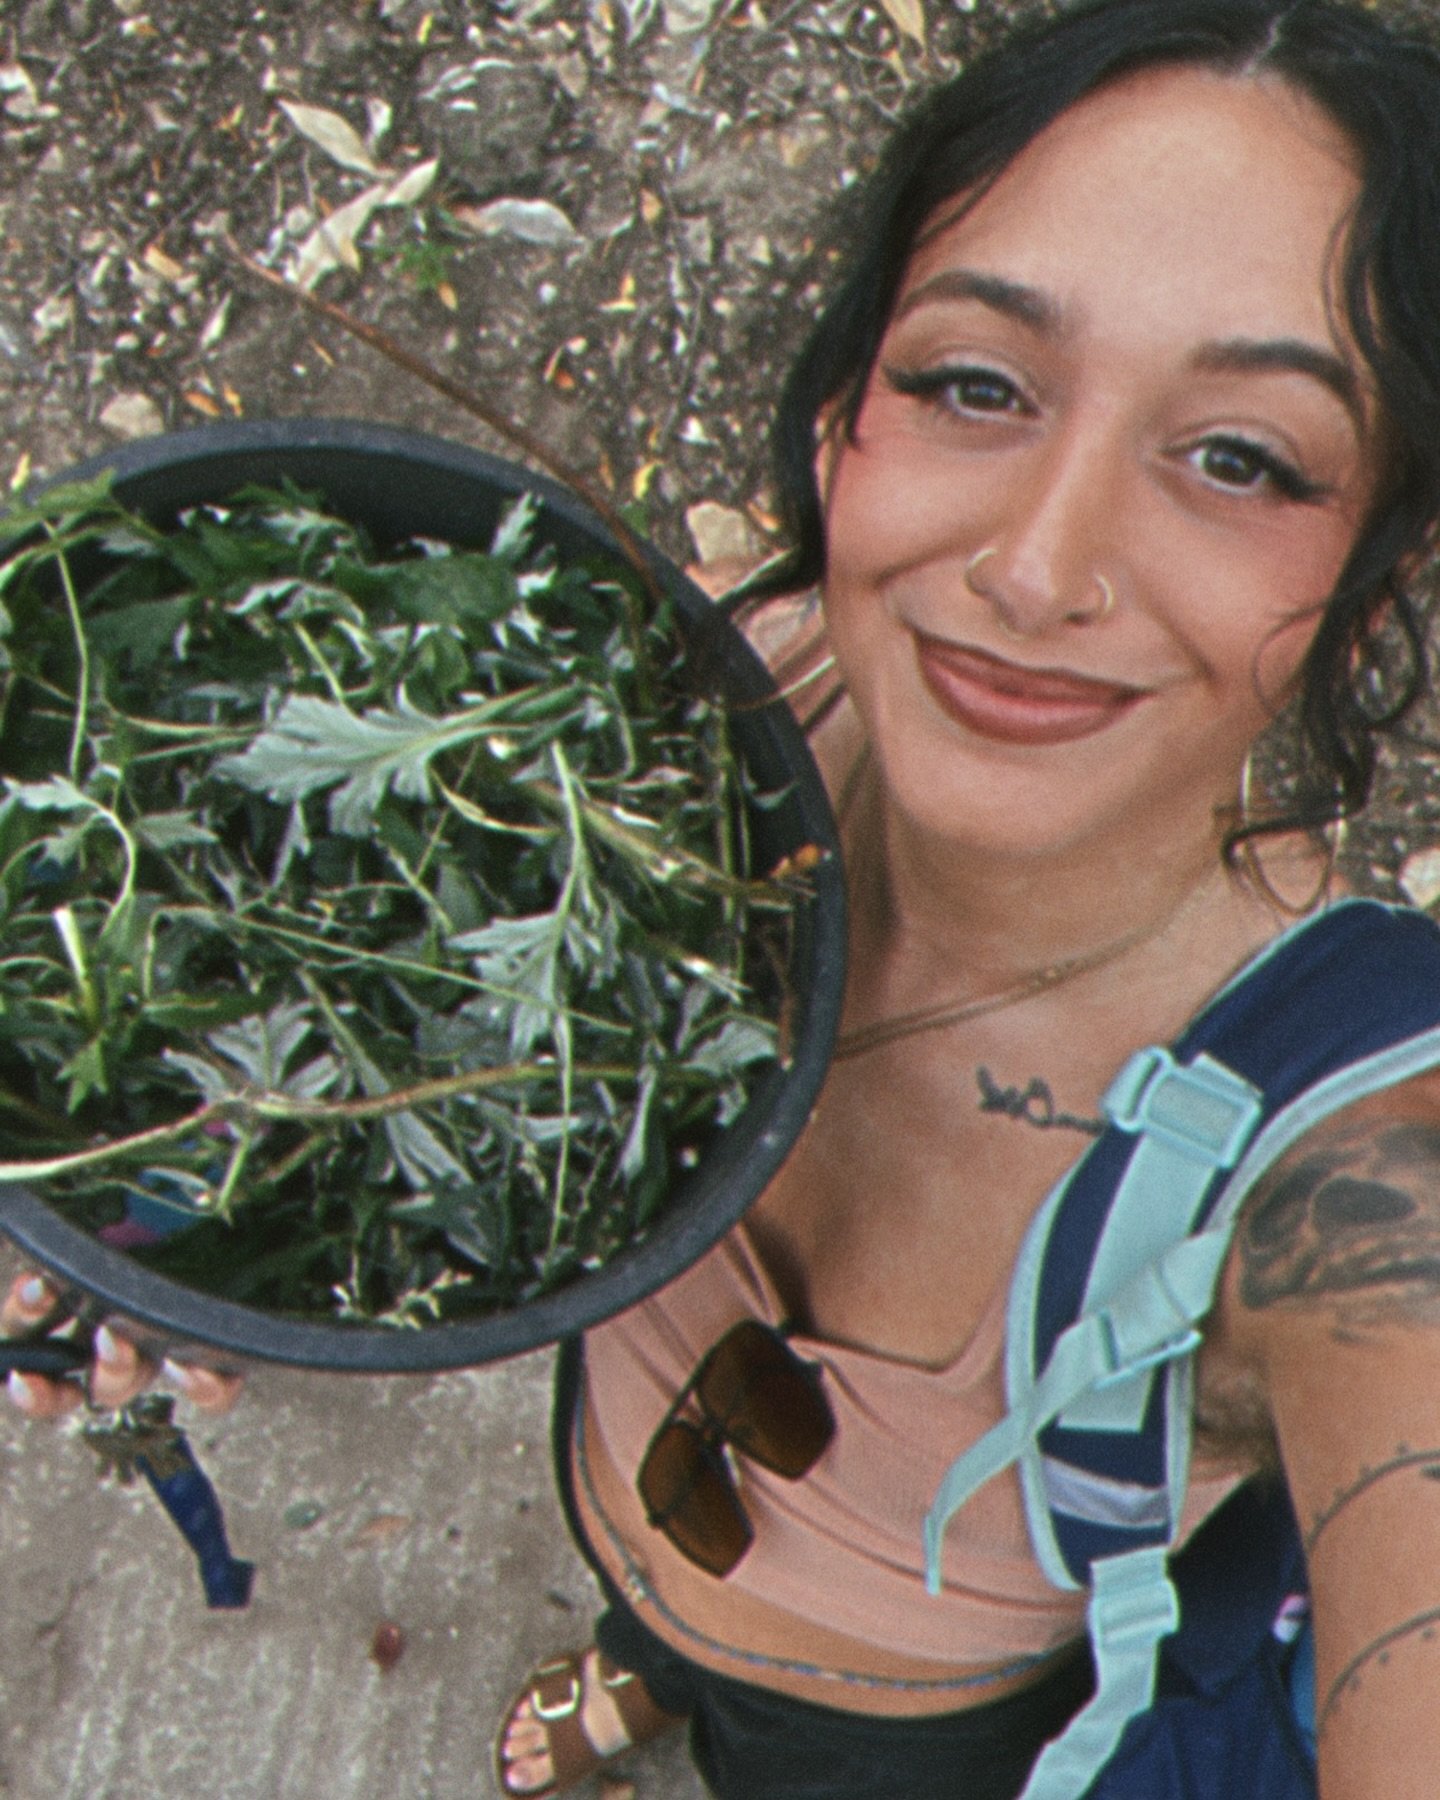 A happy mom w their bucket of mugwort that their kiddo harvested themselves in their school&rsquo;s community garden. &ldquo;I asked if I could take some home for my mom bc my mom likes mugwort and they told me as much as I could carry so I carried t